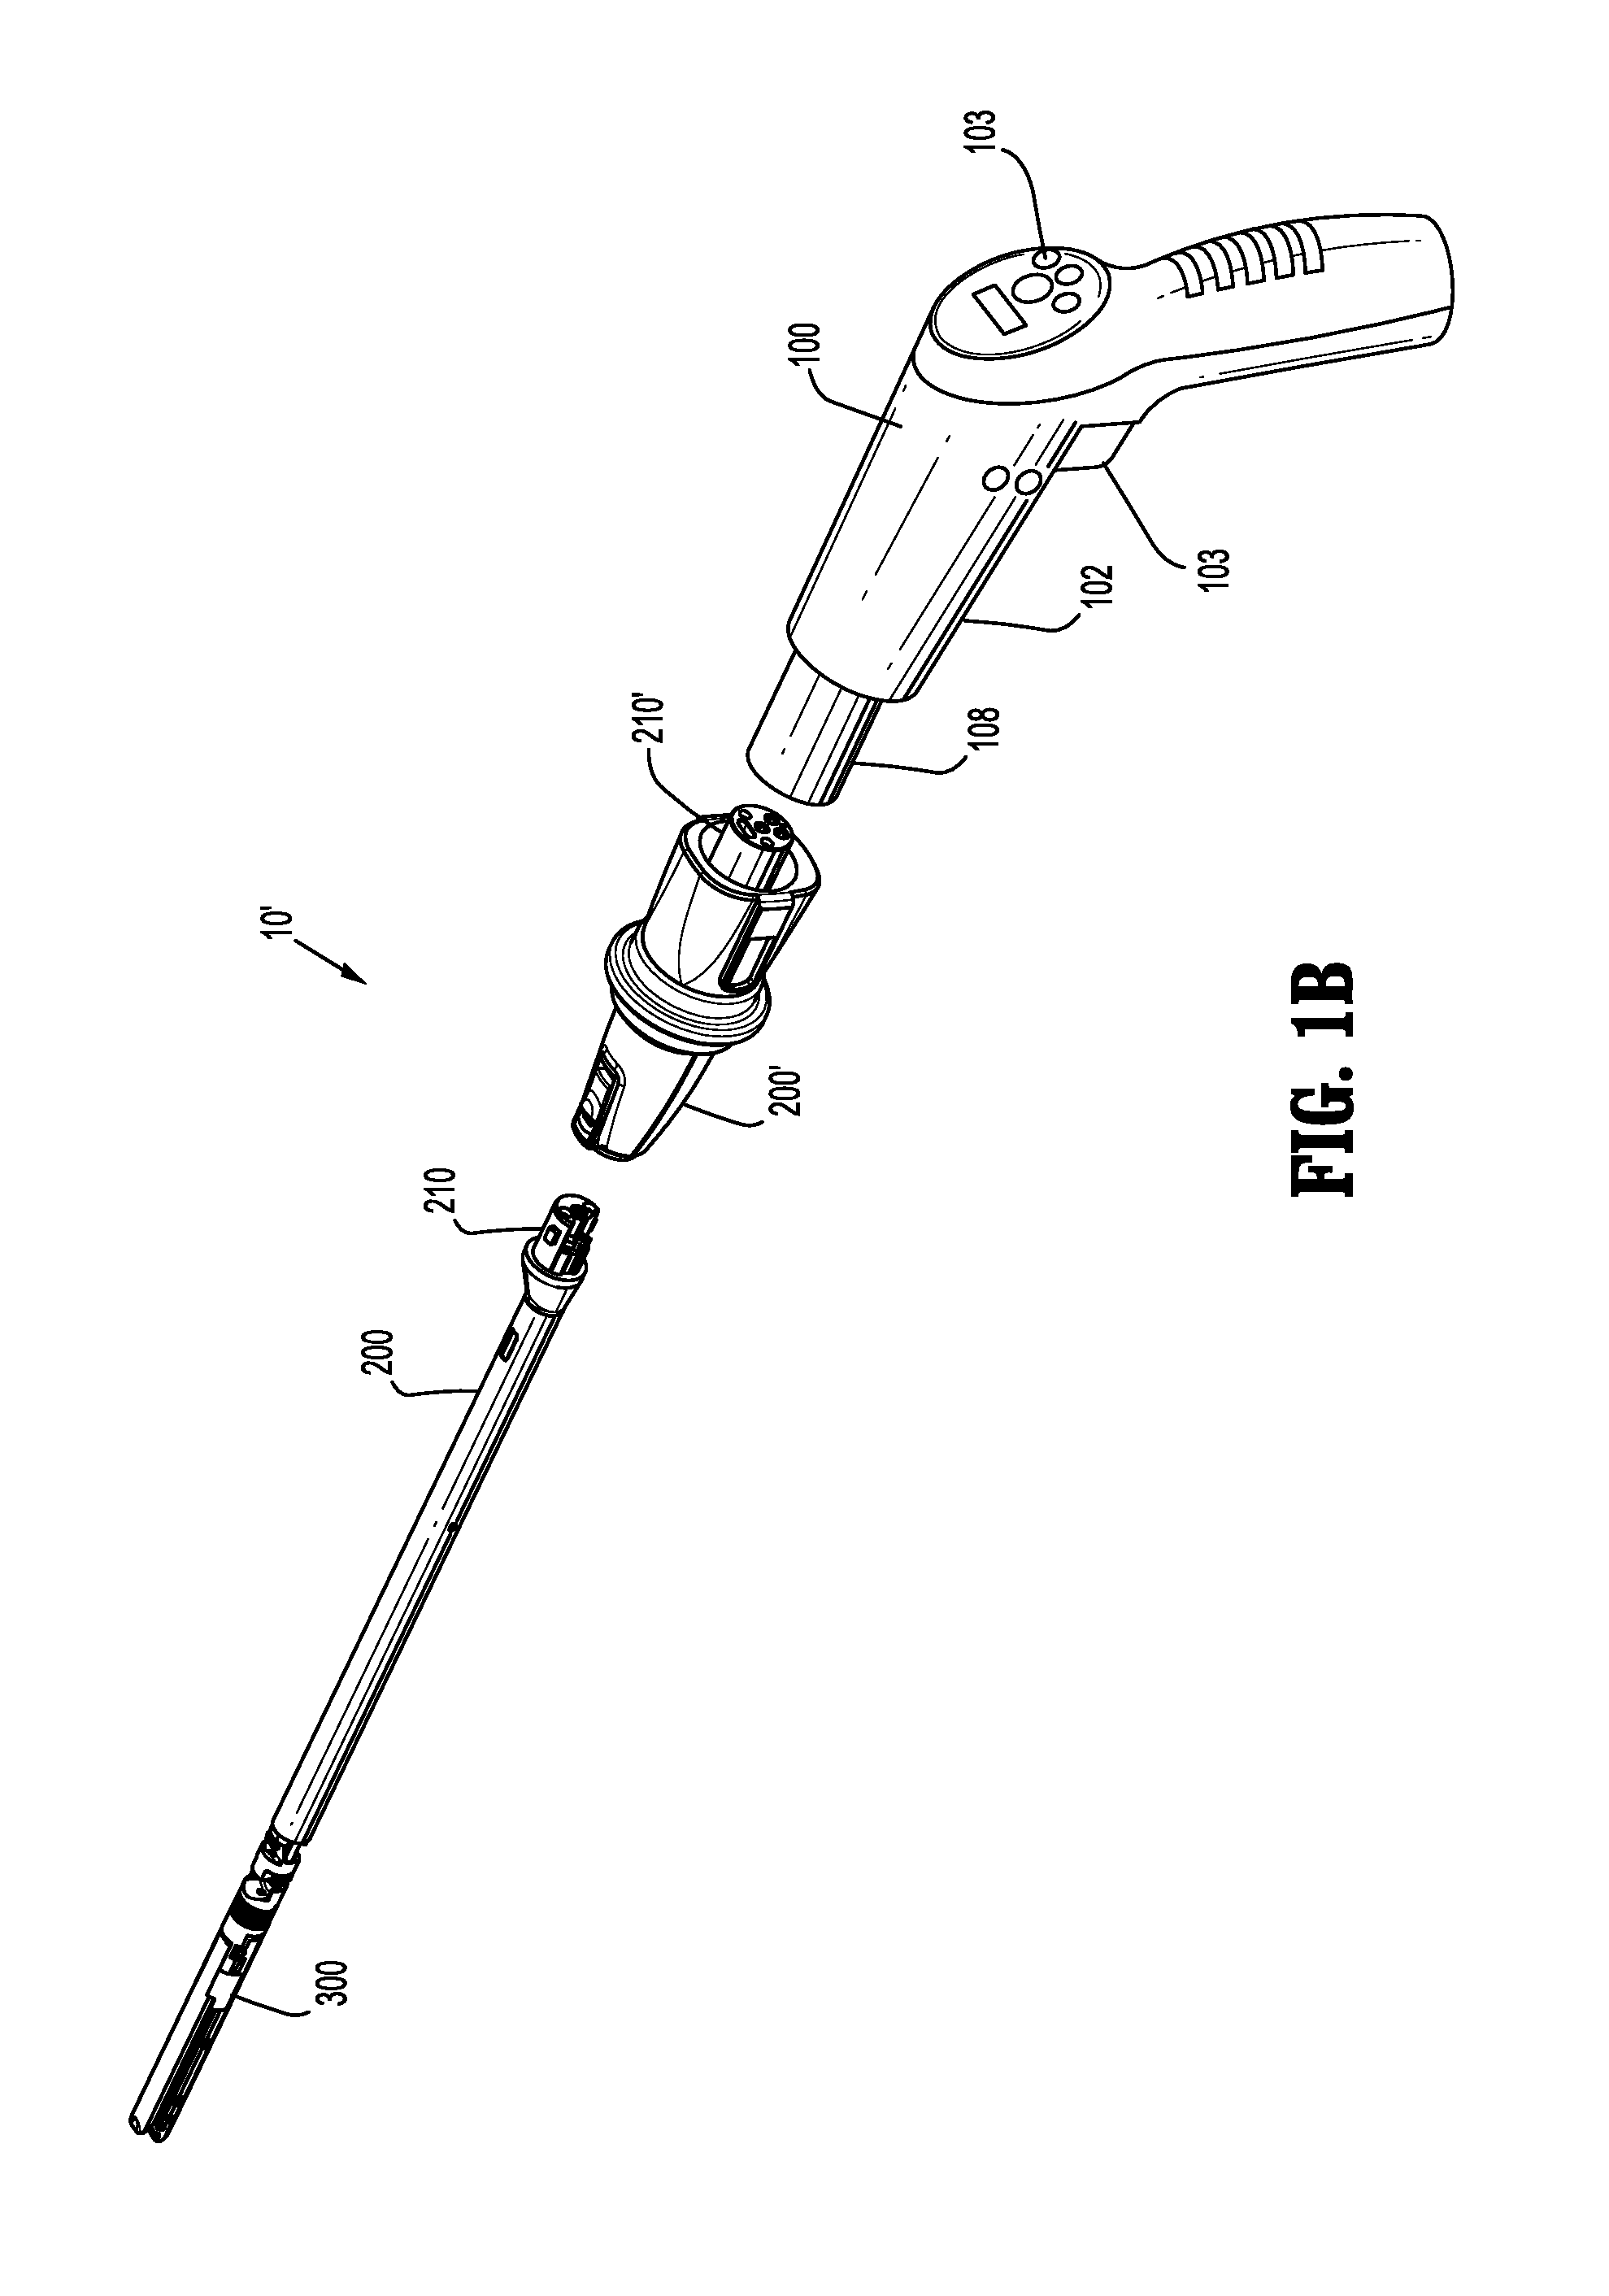 Medical device adapter with wrist mechanism